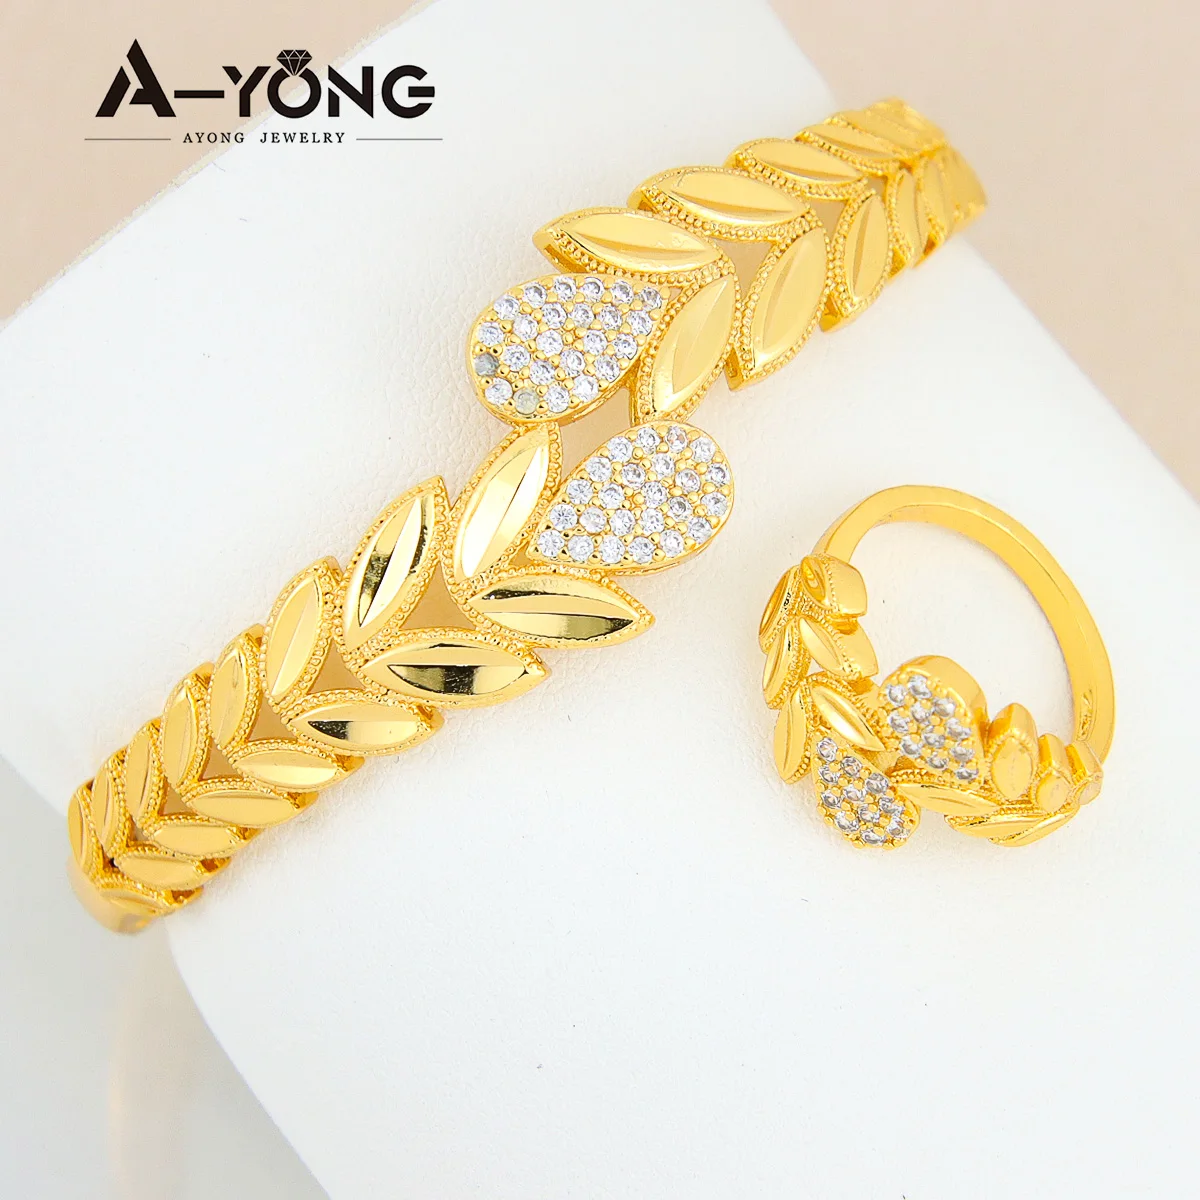 Saudi Gold Bangle 21k 13.10grams Price: PhP39,300.00 Follow me on  Instagram: @mhaydkc16 Like my page on Facebook: Mhaydk… | Lovely jewellery, Gold  bangles, Bangles